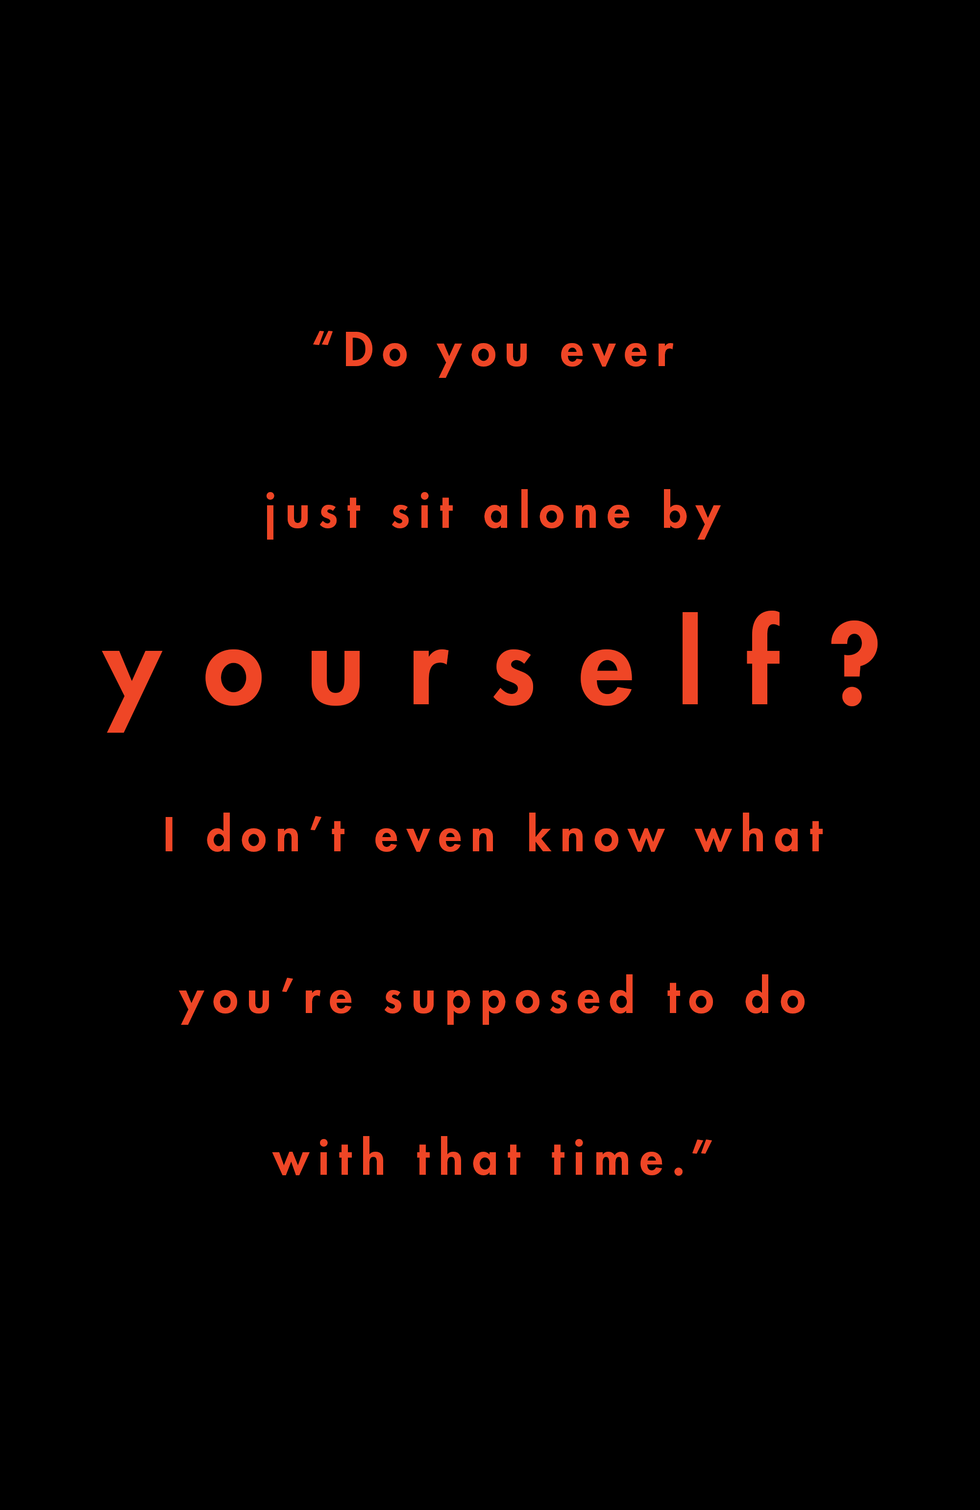 red text on black background reads “do you ever just sit alone by yourself i don’t even know what you’re supposed to do with that time”